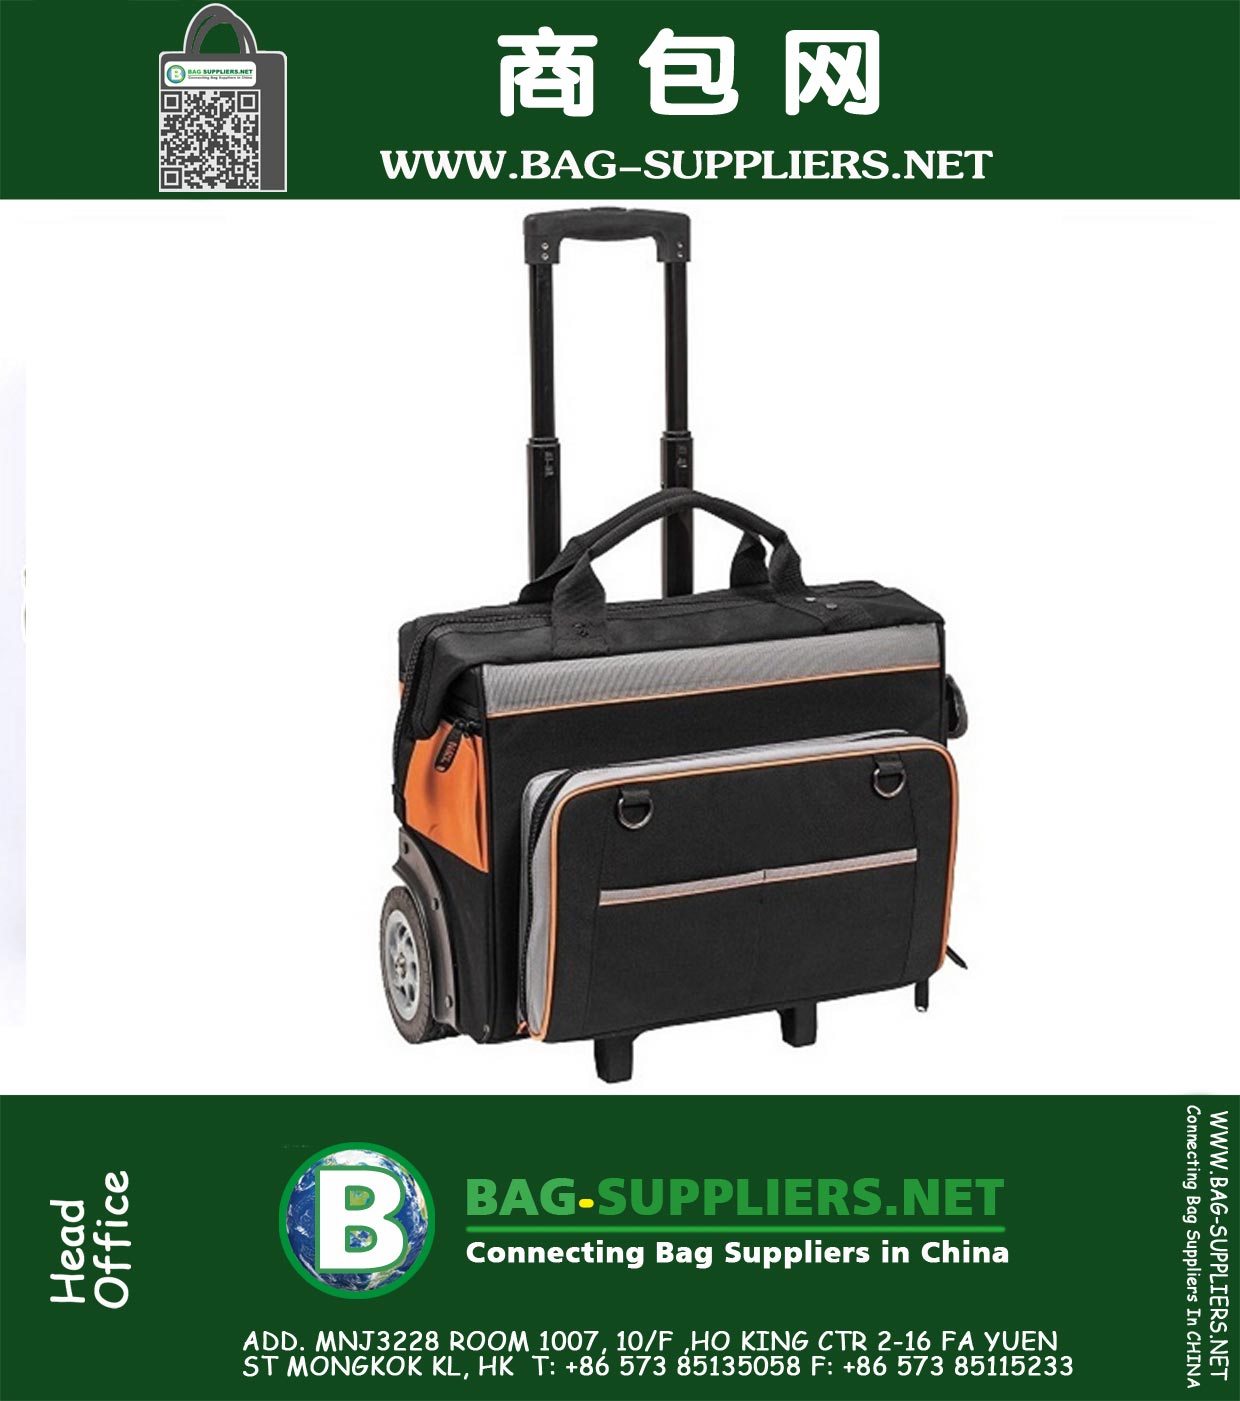 Rolling Bag is a heavy-duty wheeled tool bag featuring rugged 6-inch wheels that can easily handle rough terrain.